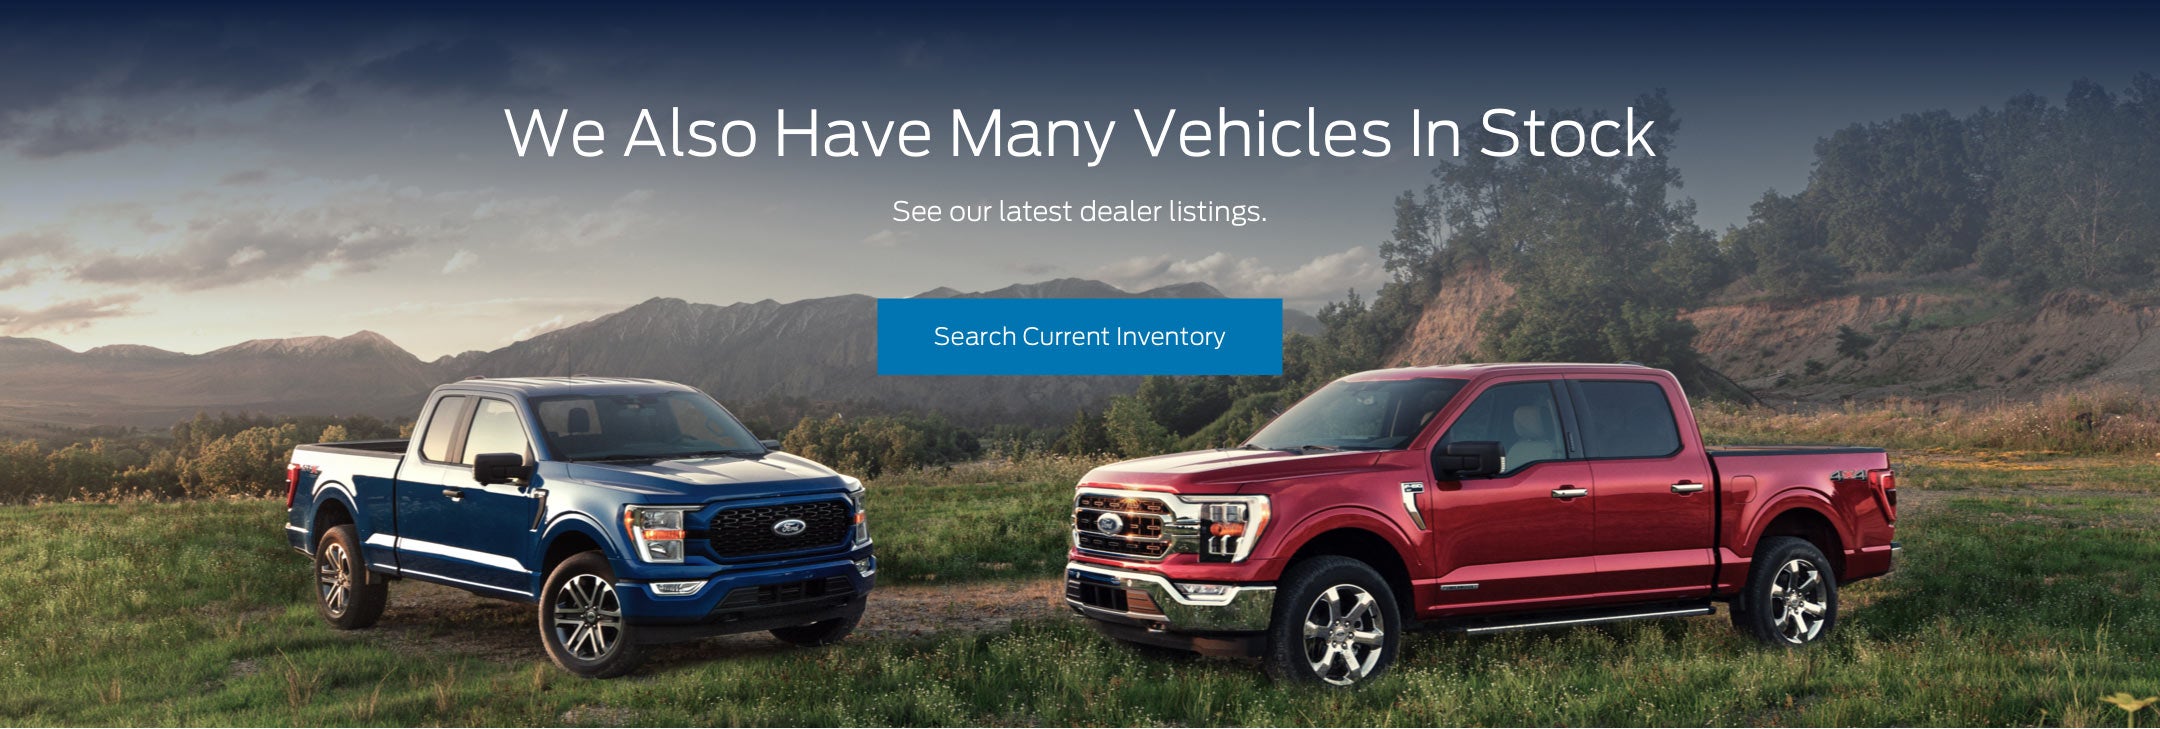 Ford vehicles in stock | Tri Lakes Ford in Branson MO